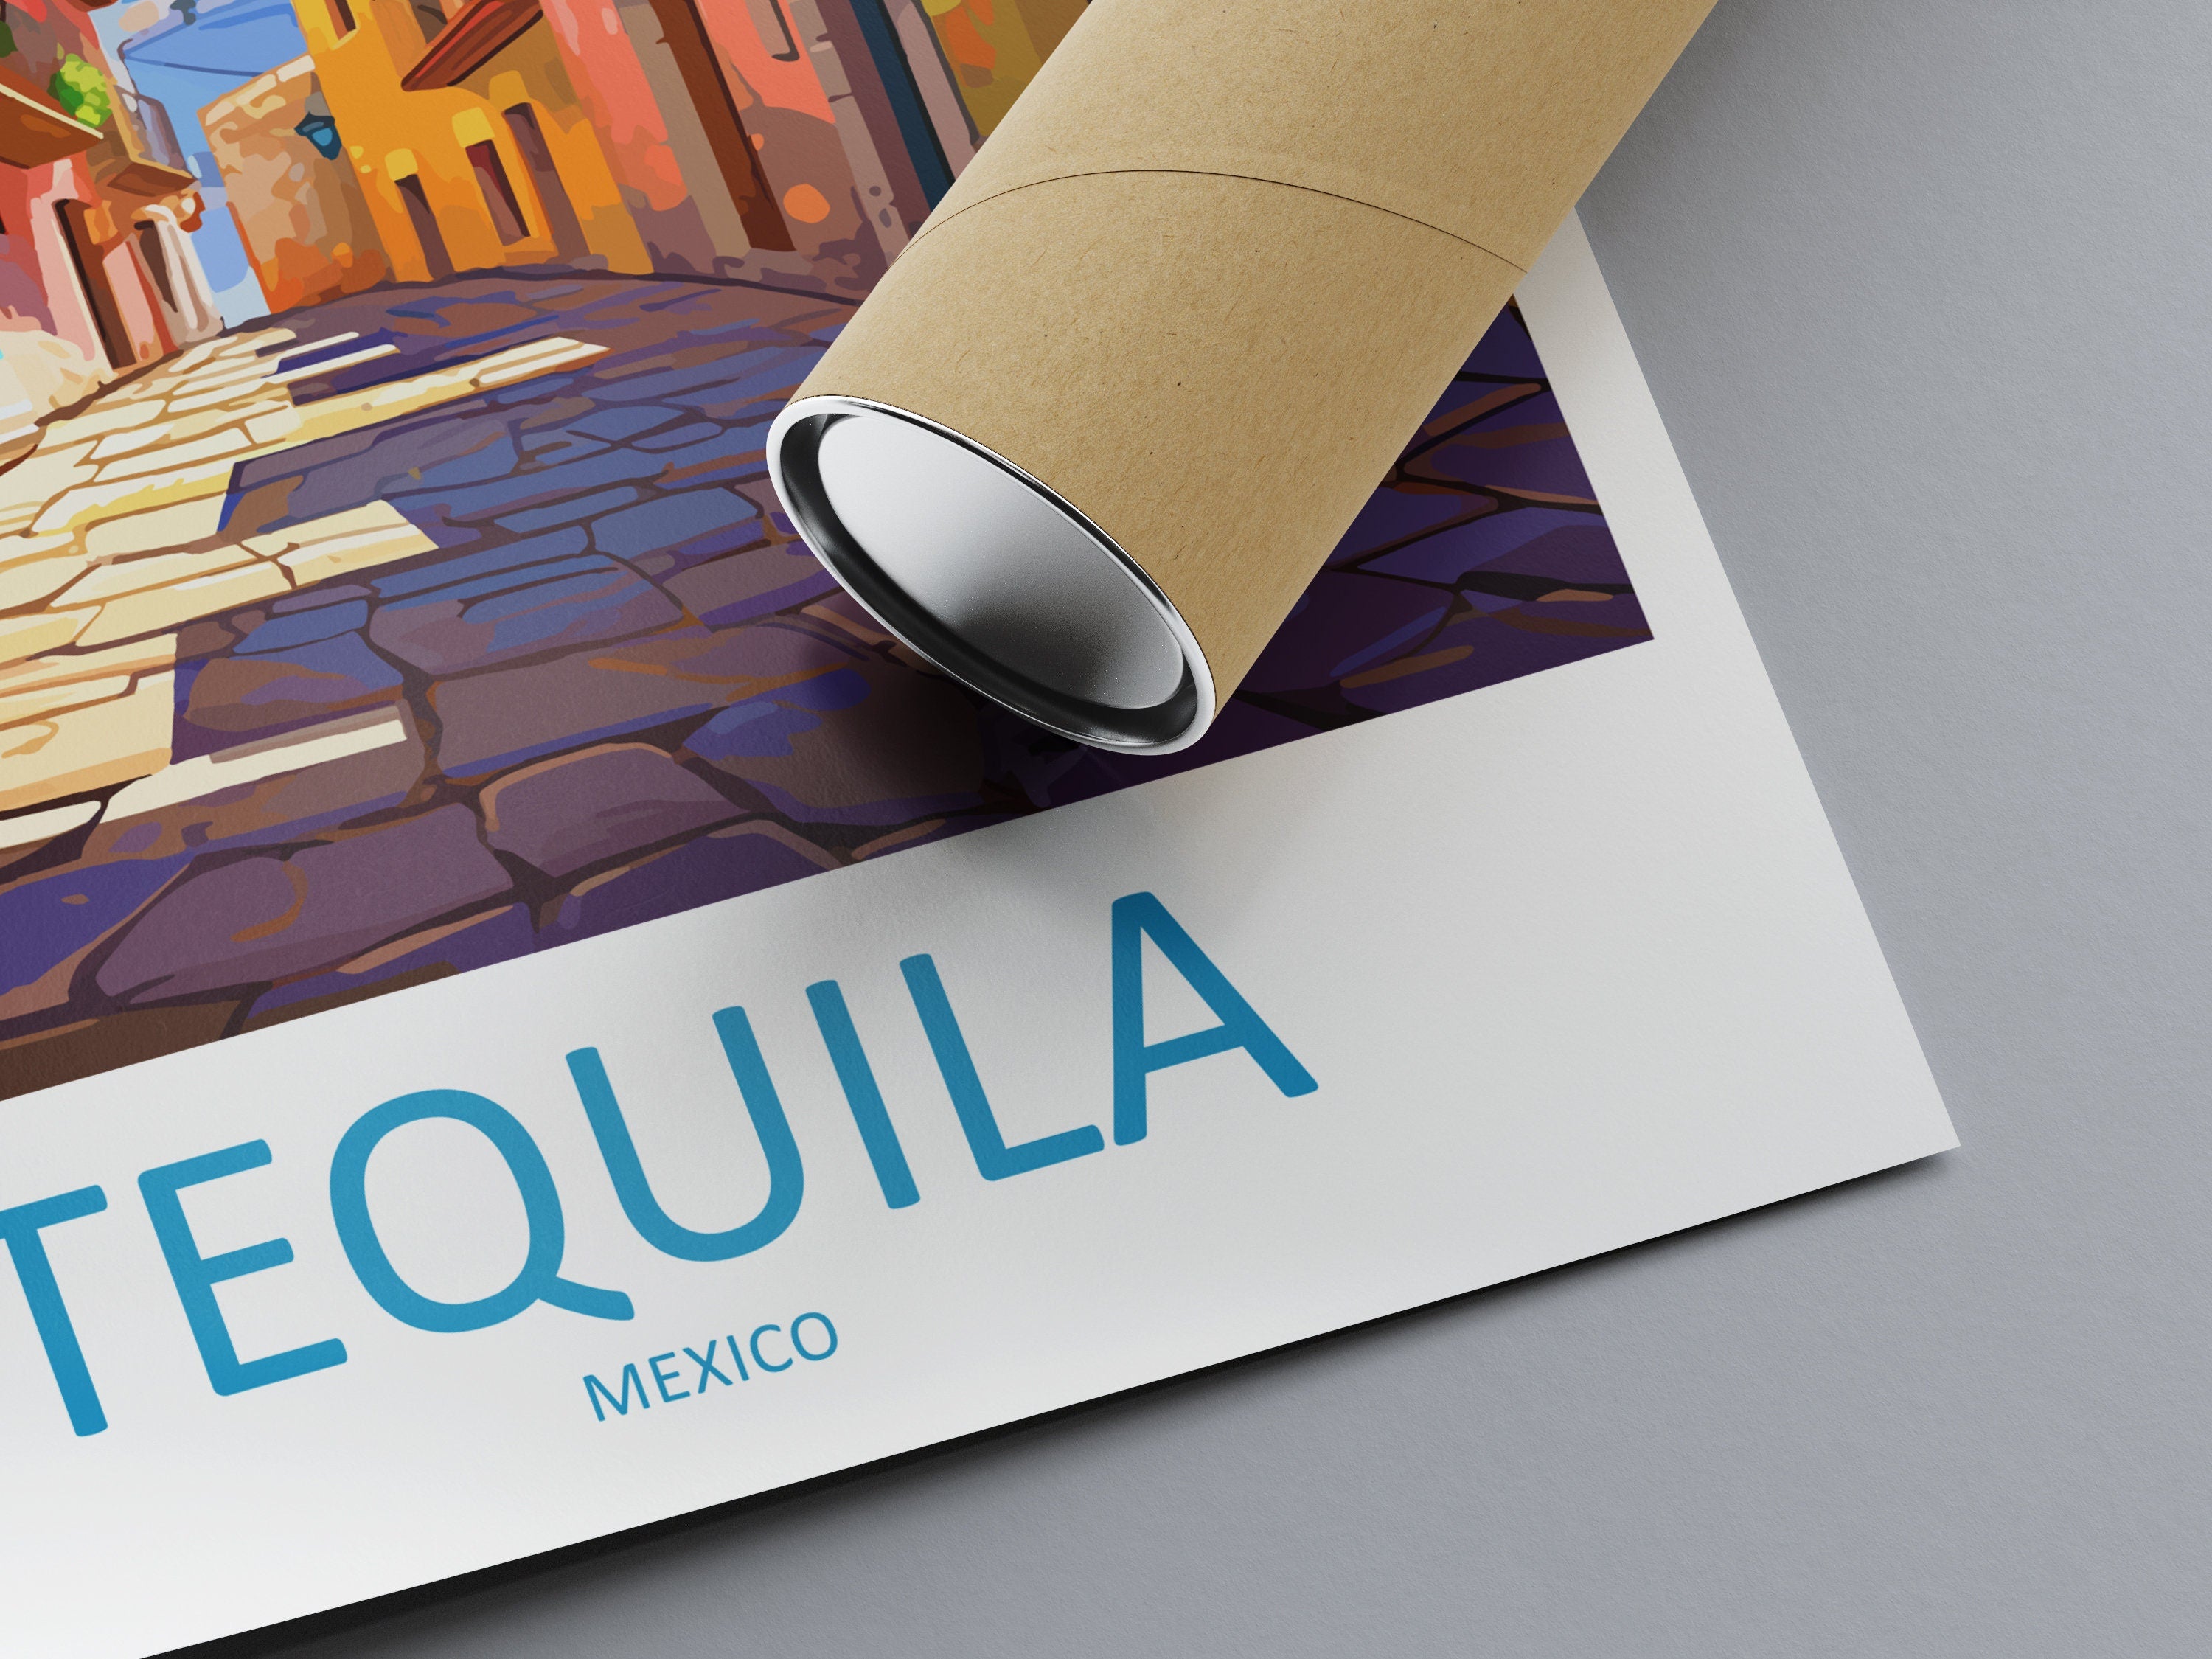 Tequila Travel Print Wall Art Tequila Wall Hanging Home Decor Tequila Gift Art Lovers Wall Art Print Art Mexico Art